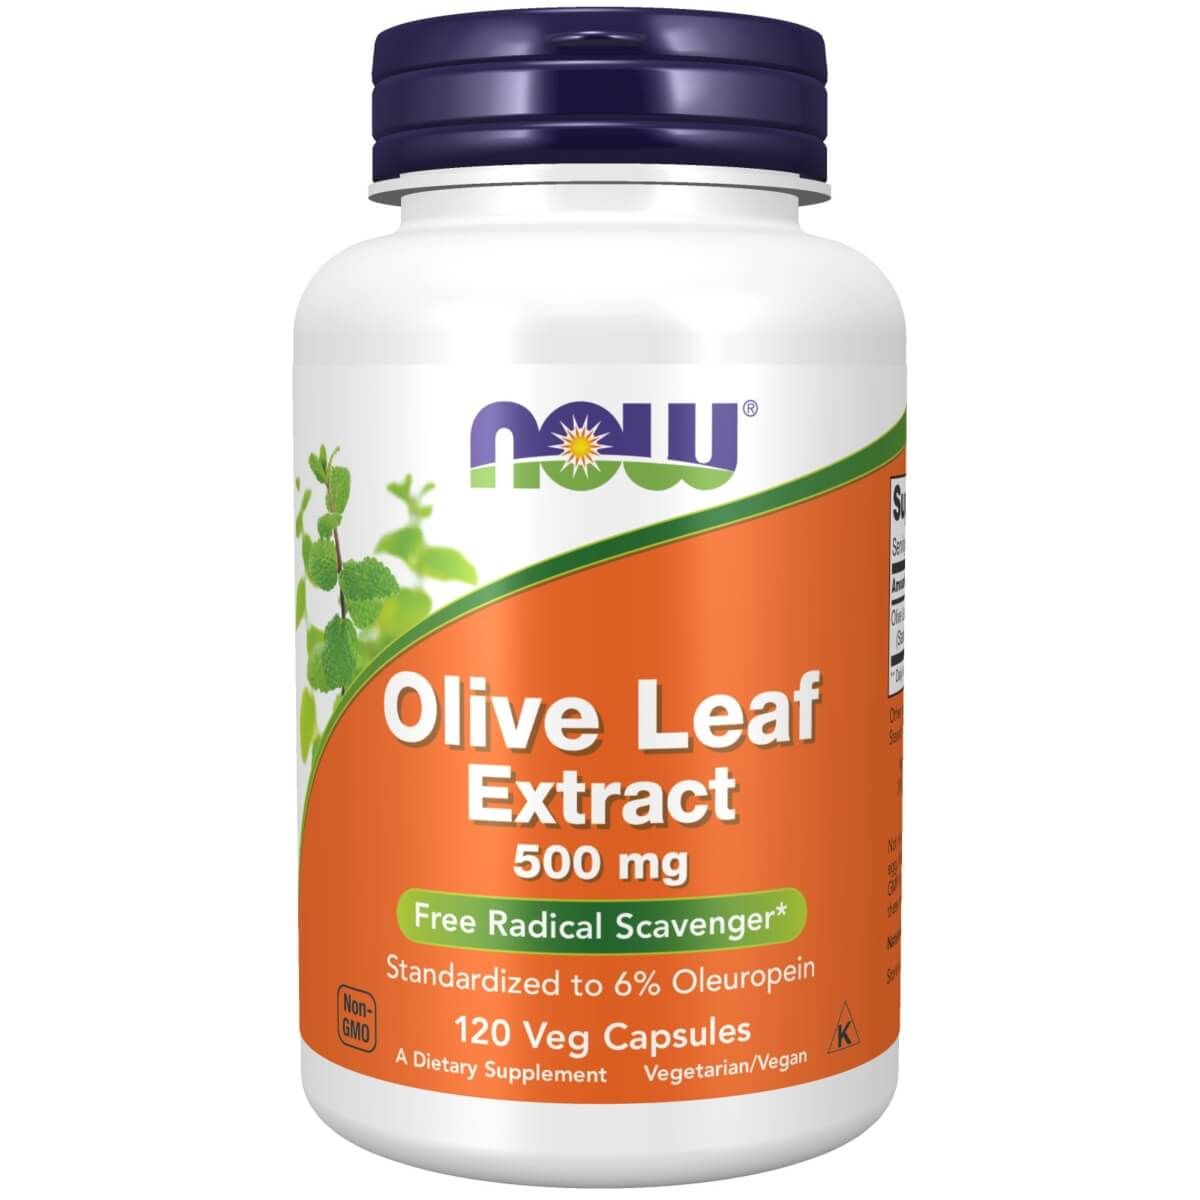 Photos - Vitamins & Minerals Now Foods Olive Leaf Extract 500 mg 120 Veg Capsules PBW-P27543 